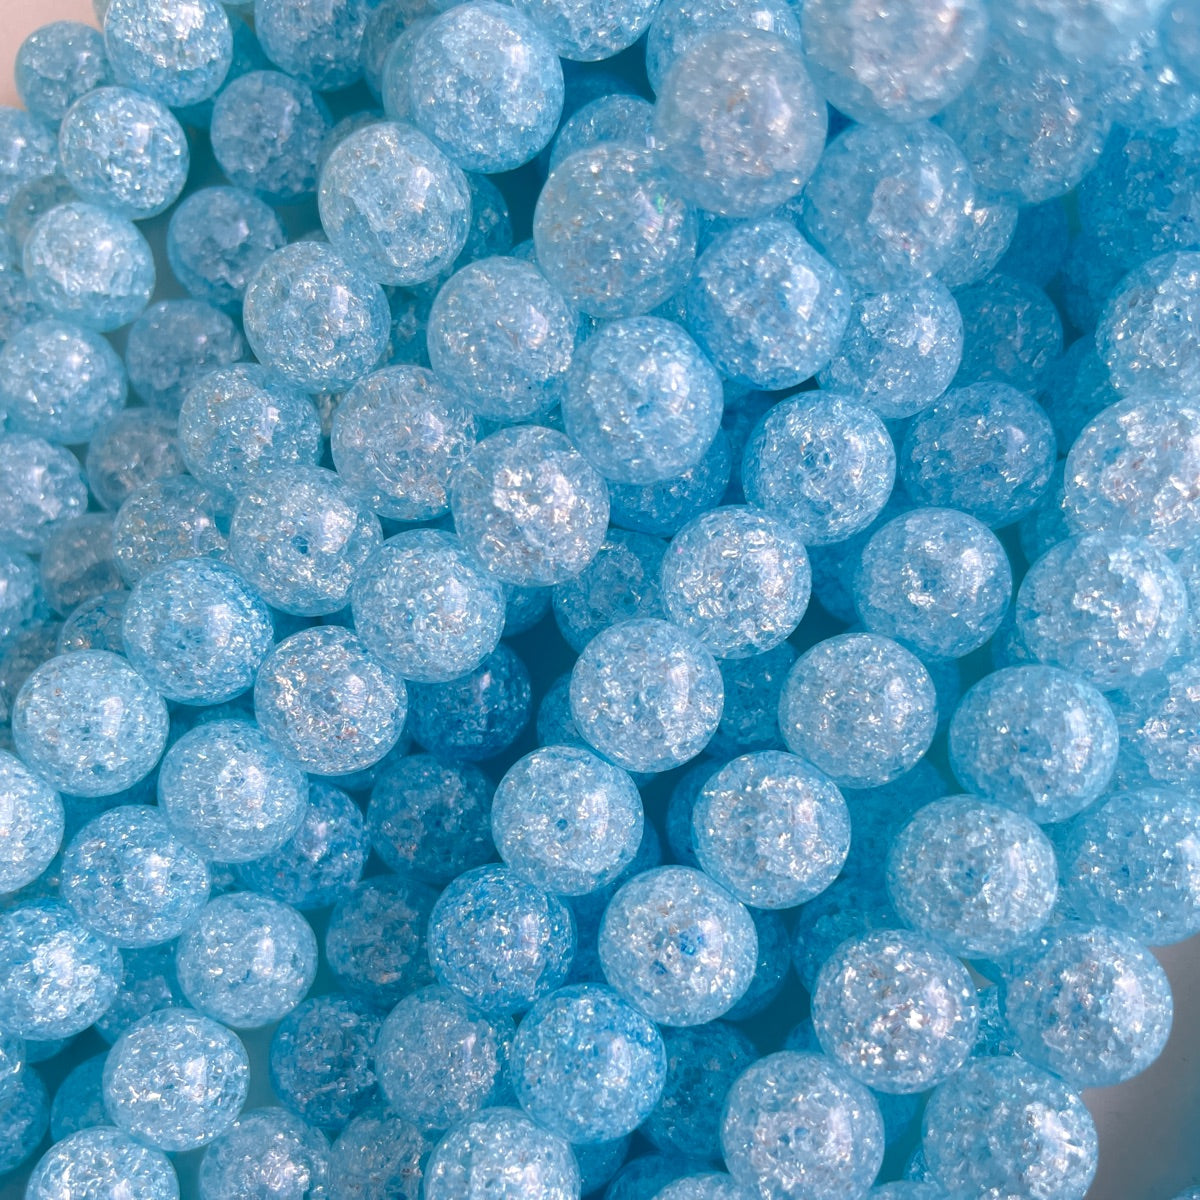 2 Strands/lot 10mm Colorful Popcorn Crystal Round Beads Light Blue Stone Beads New Beads Arrivals Other Stone Beads Charms Beads Beyond